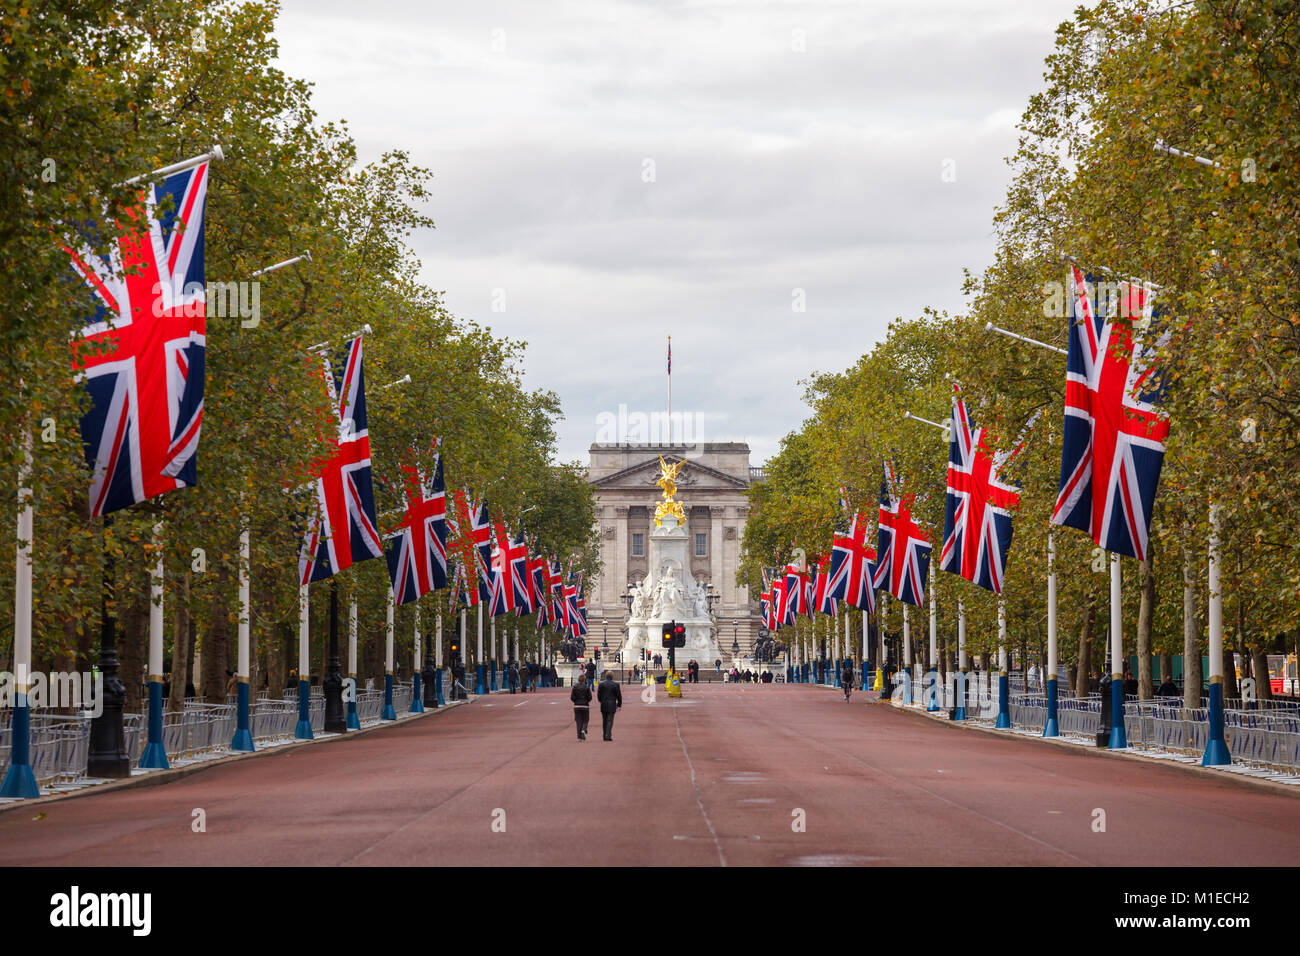 LONDON, UK - OCTOBER 28, 2012: A view along the Mall decorated with Union Jack flags towards Buckingham Palace Stock Photo